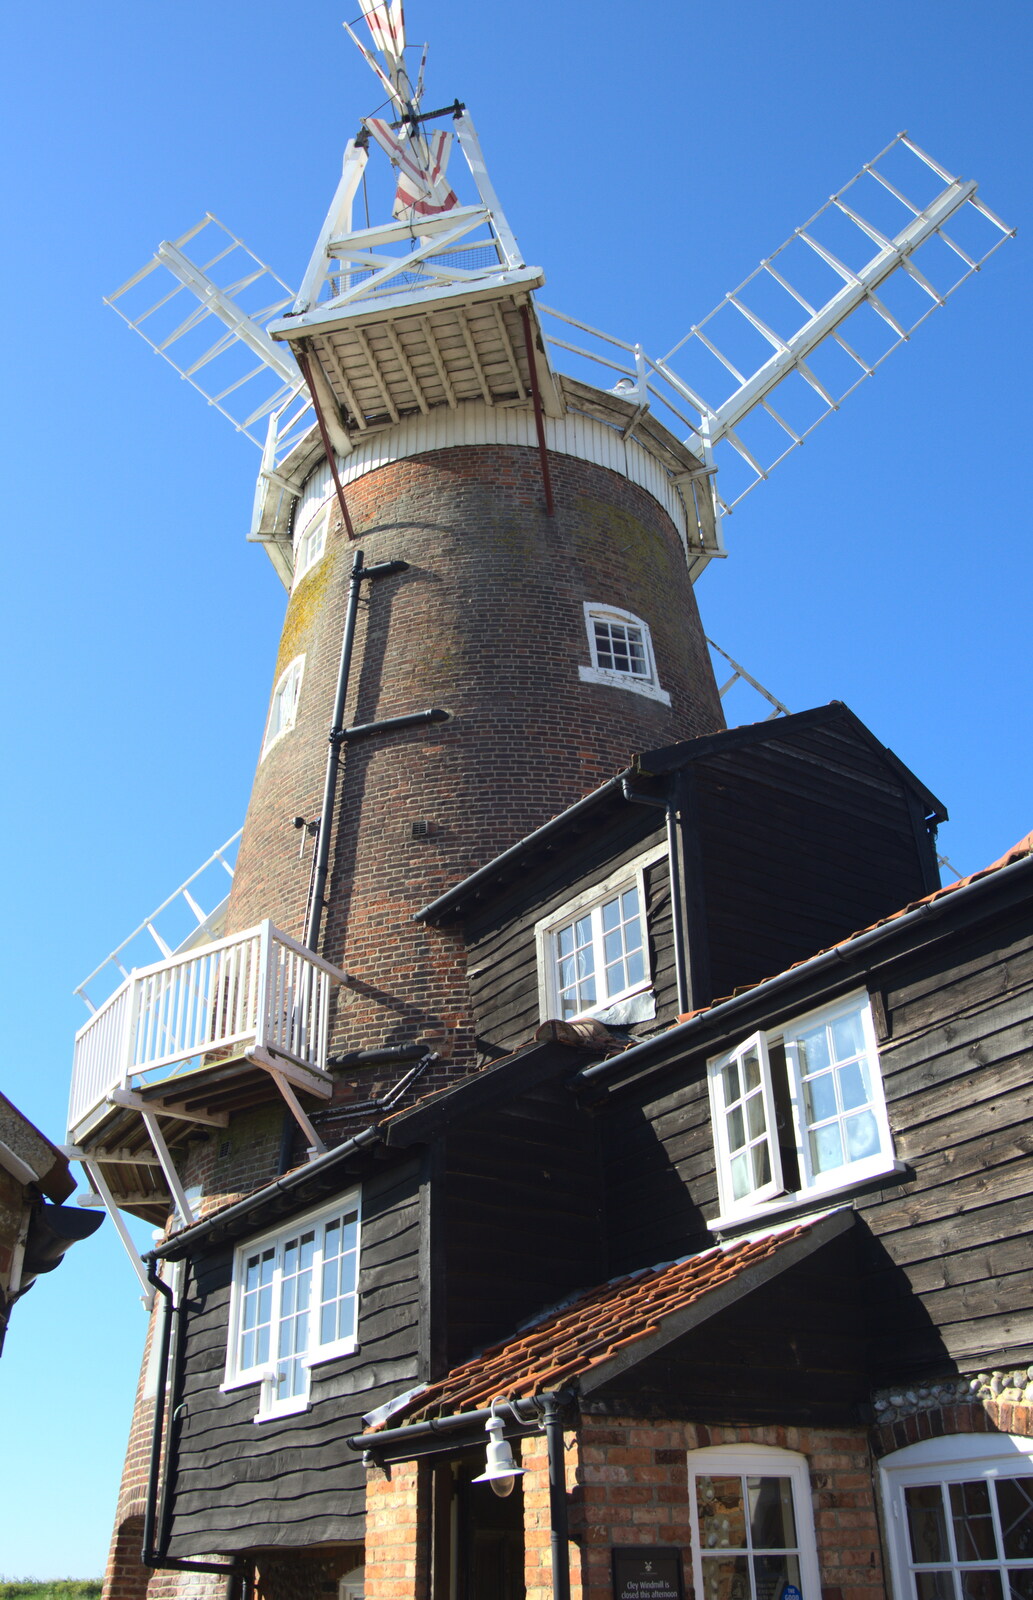 The back of the windmill from The BSCC at Needham, and a Birthday By The Sea, Cley, Norfolk - 26th May 2012